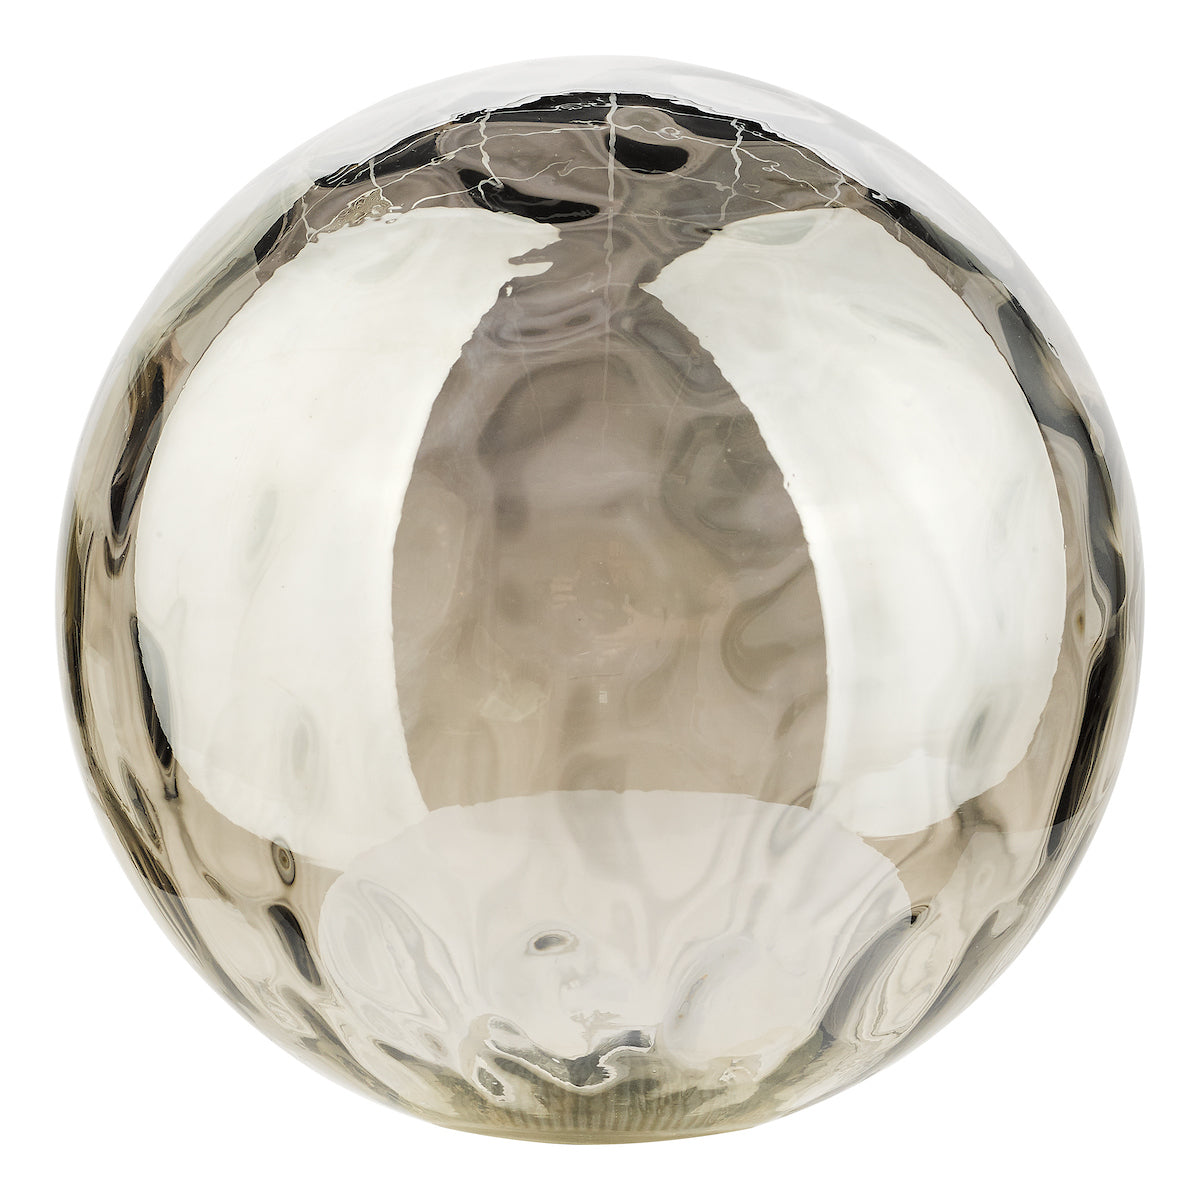 DIMPLE 5 Light Multi Pendant In Polished Chrome With Smoked Dimpled Glass - ID 12194